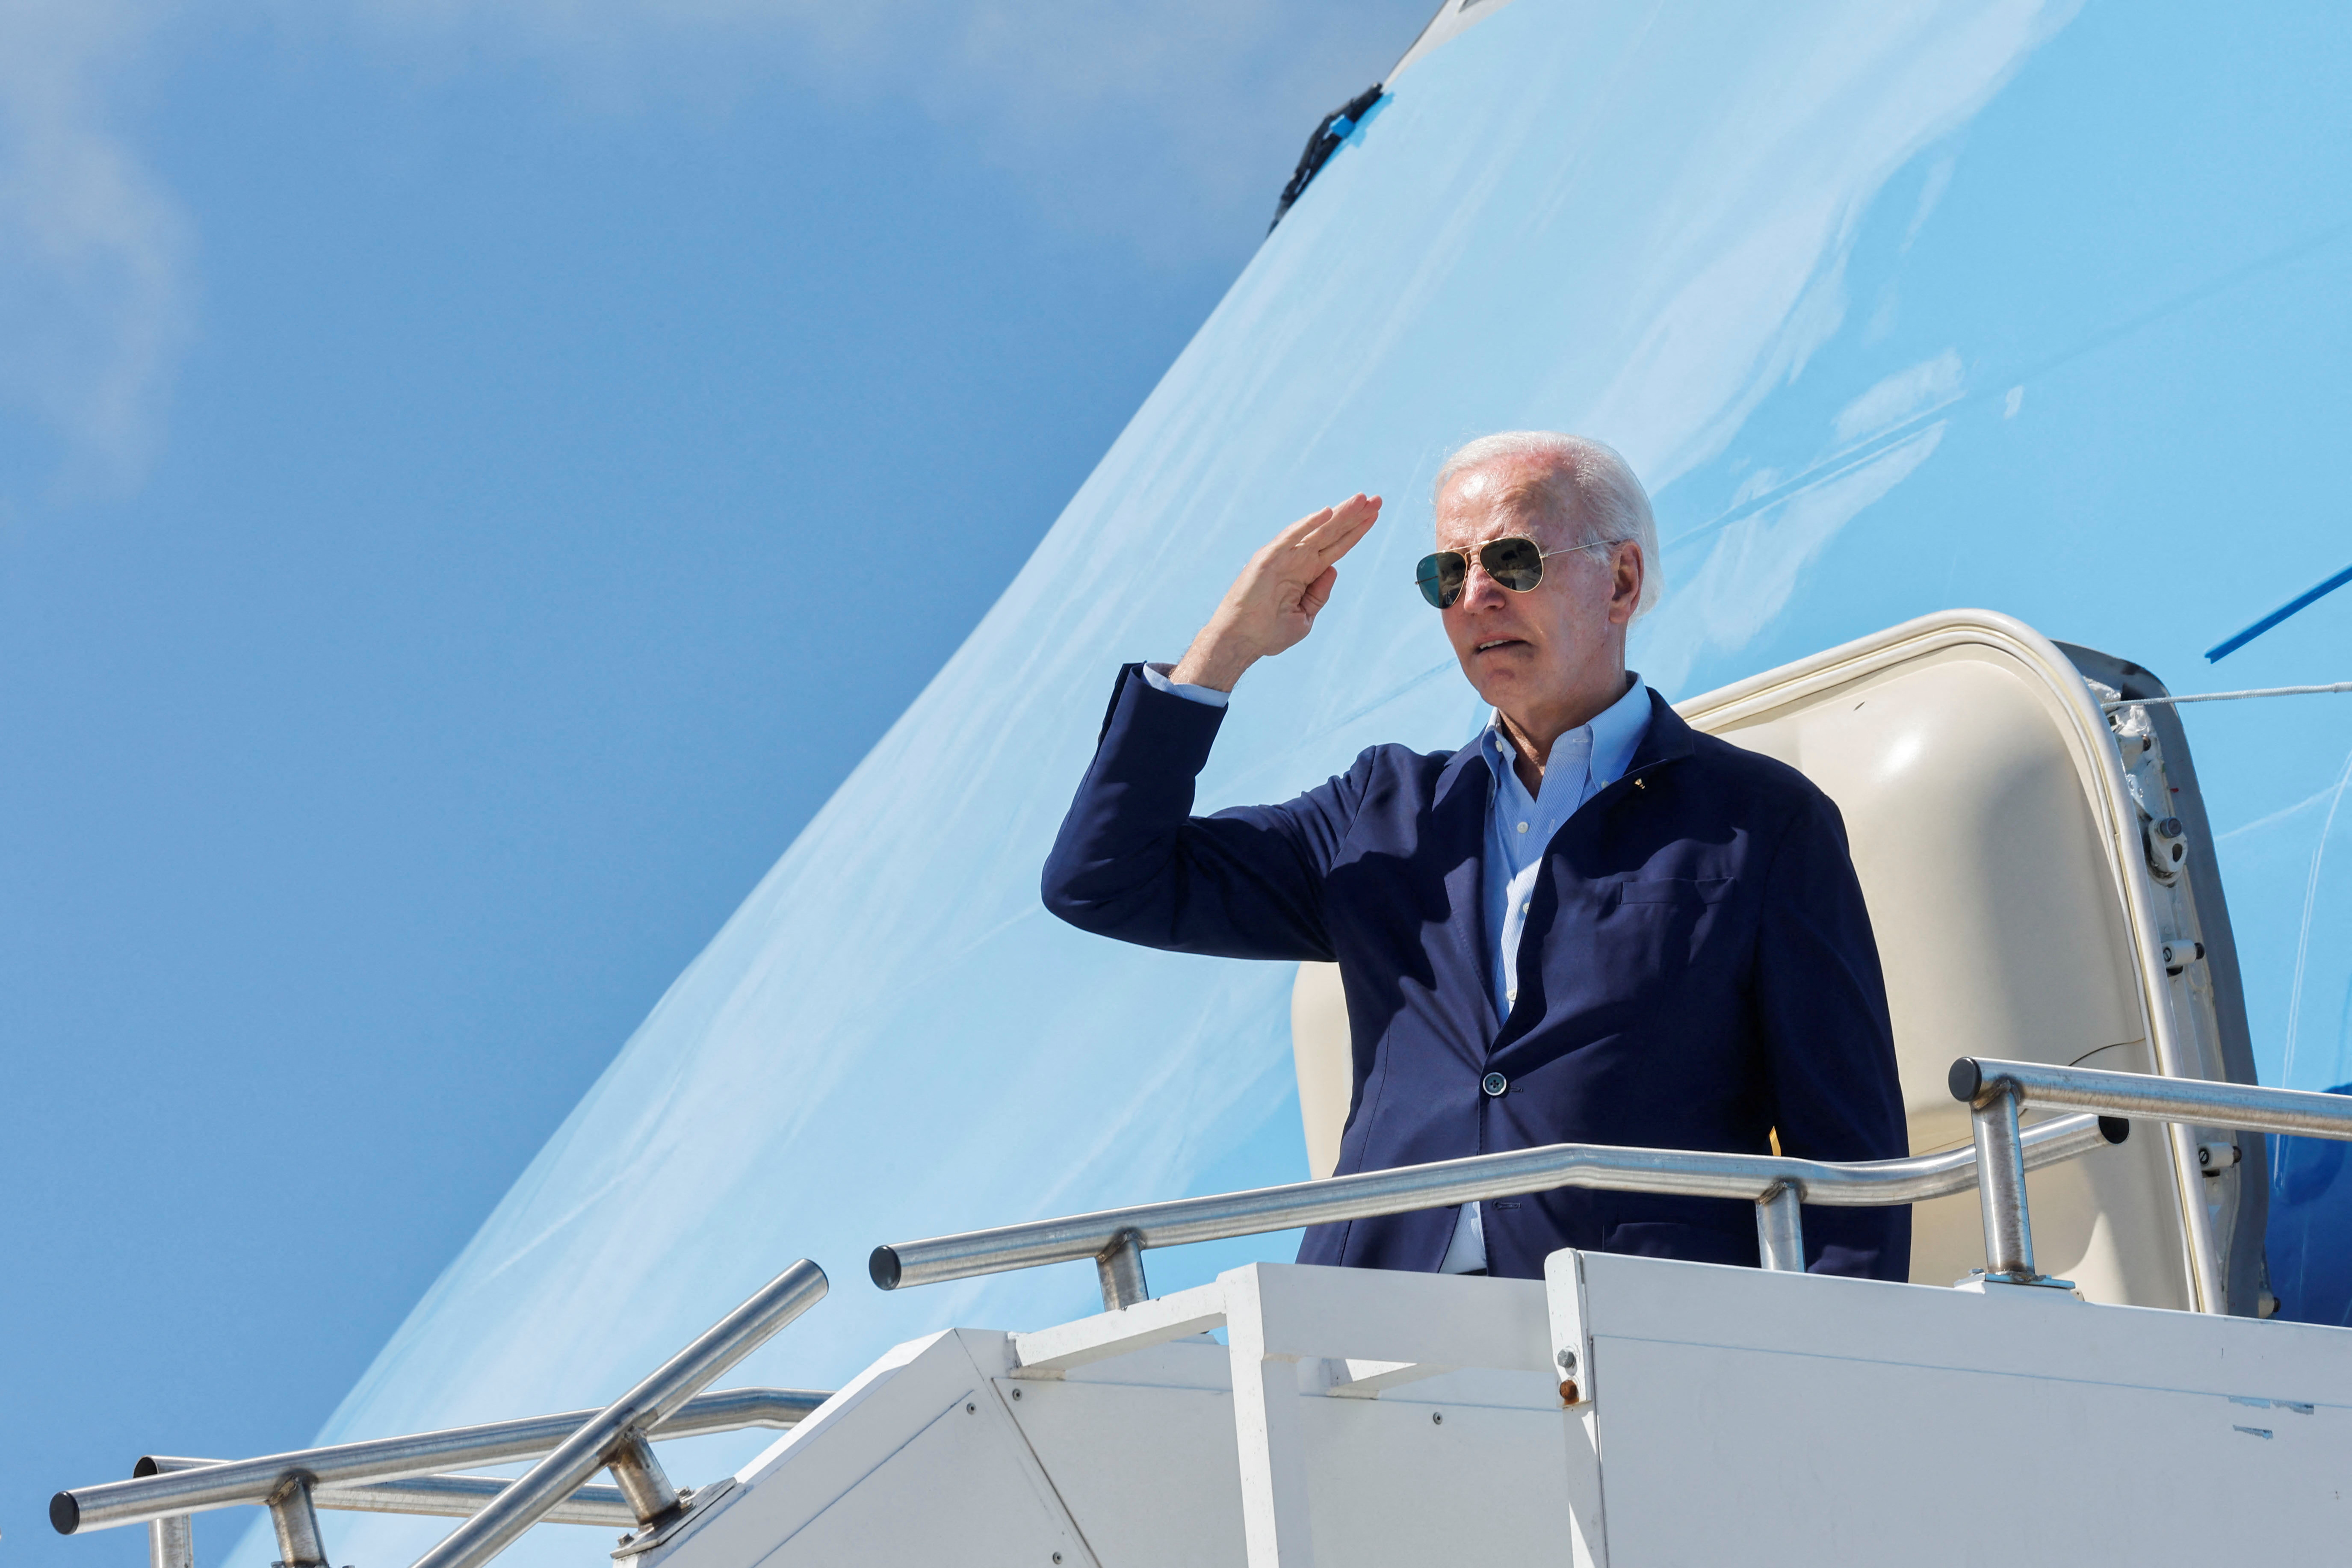 US President Joe Biden gestures as he boards Air Force One at Rohlsen Airport to depart after a New Year holiday visit to Christiansted, St. Croix, US Virgin Islands, US January 2, 2023. REUTERS/Jonathan Ernst